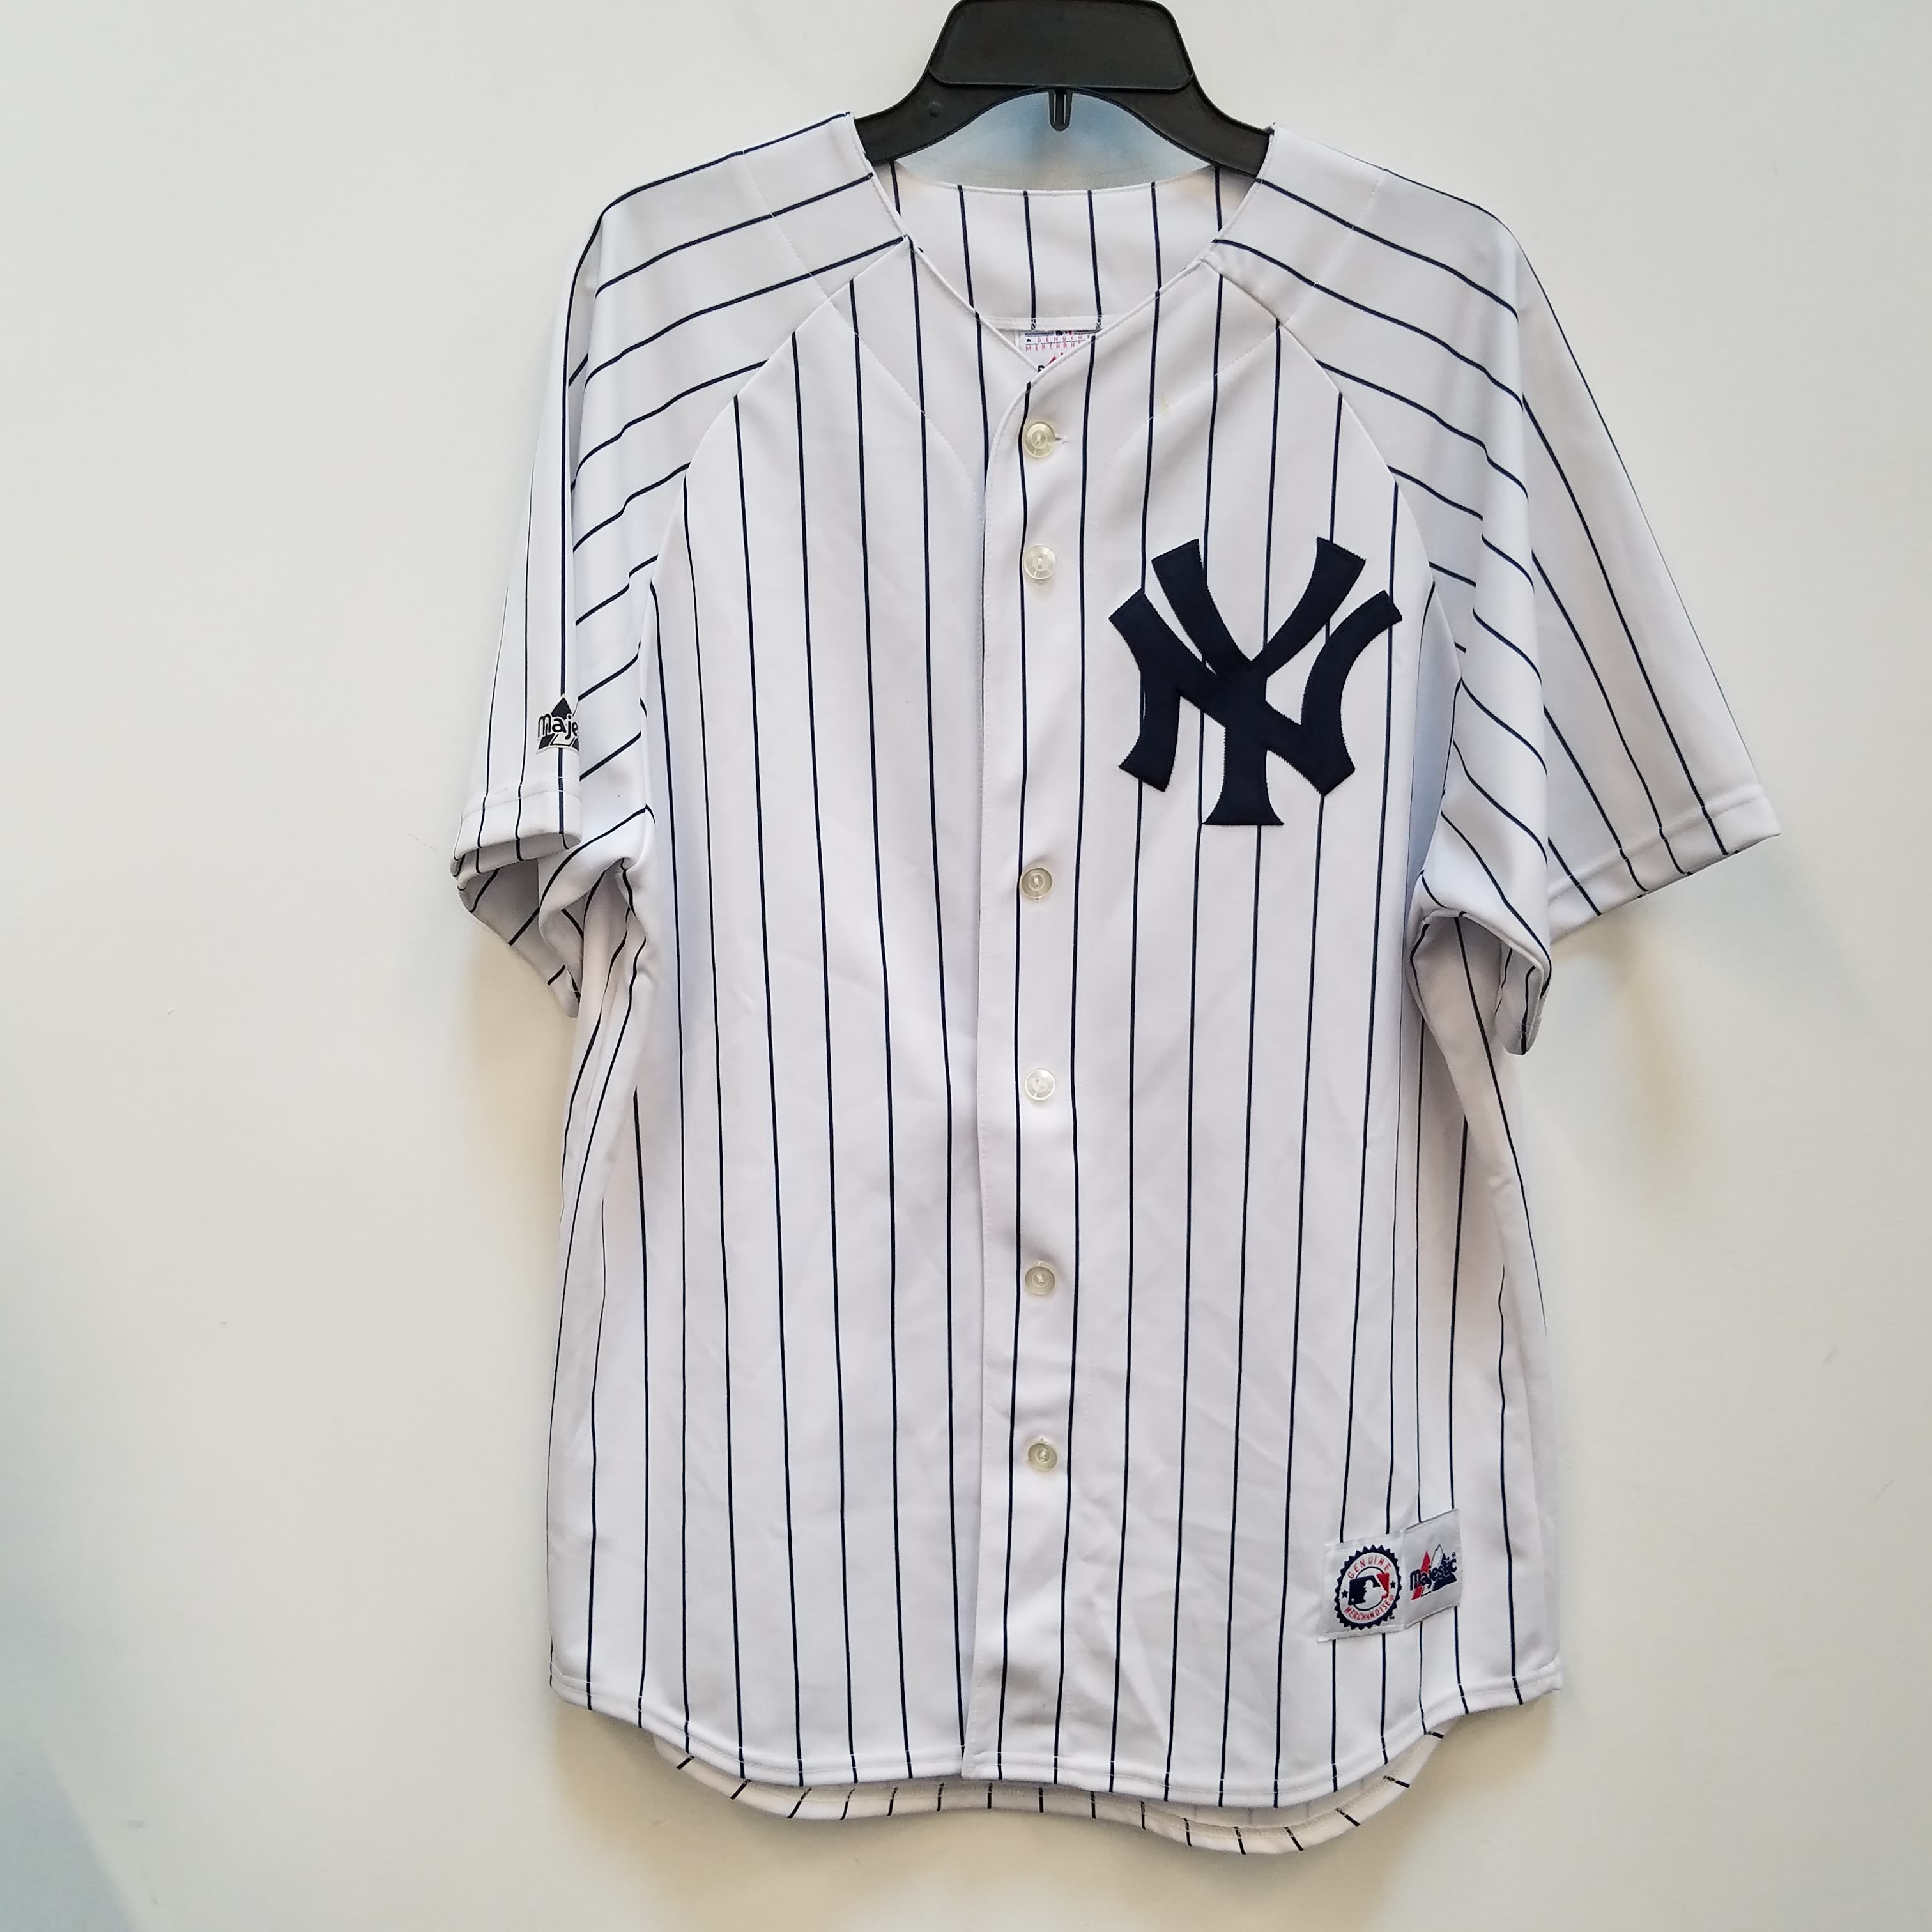 Majestic New York Yankees Baseball Jersey Tee  Jersey outfit, Sports jersey  outfit, Football jersey outfit